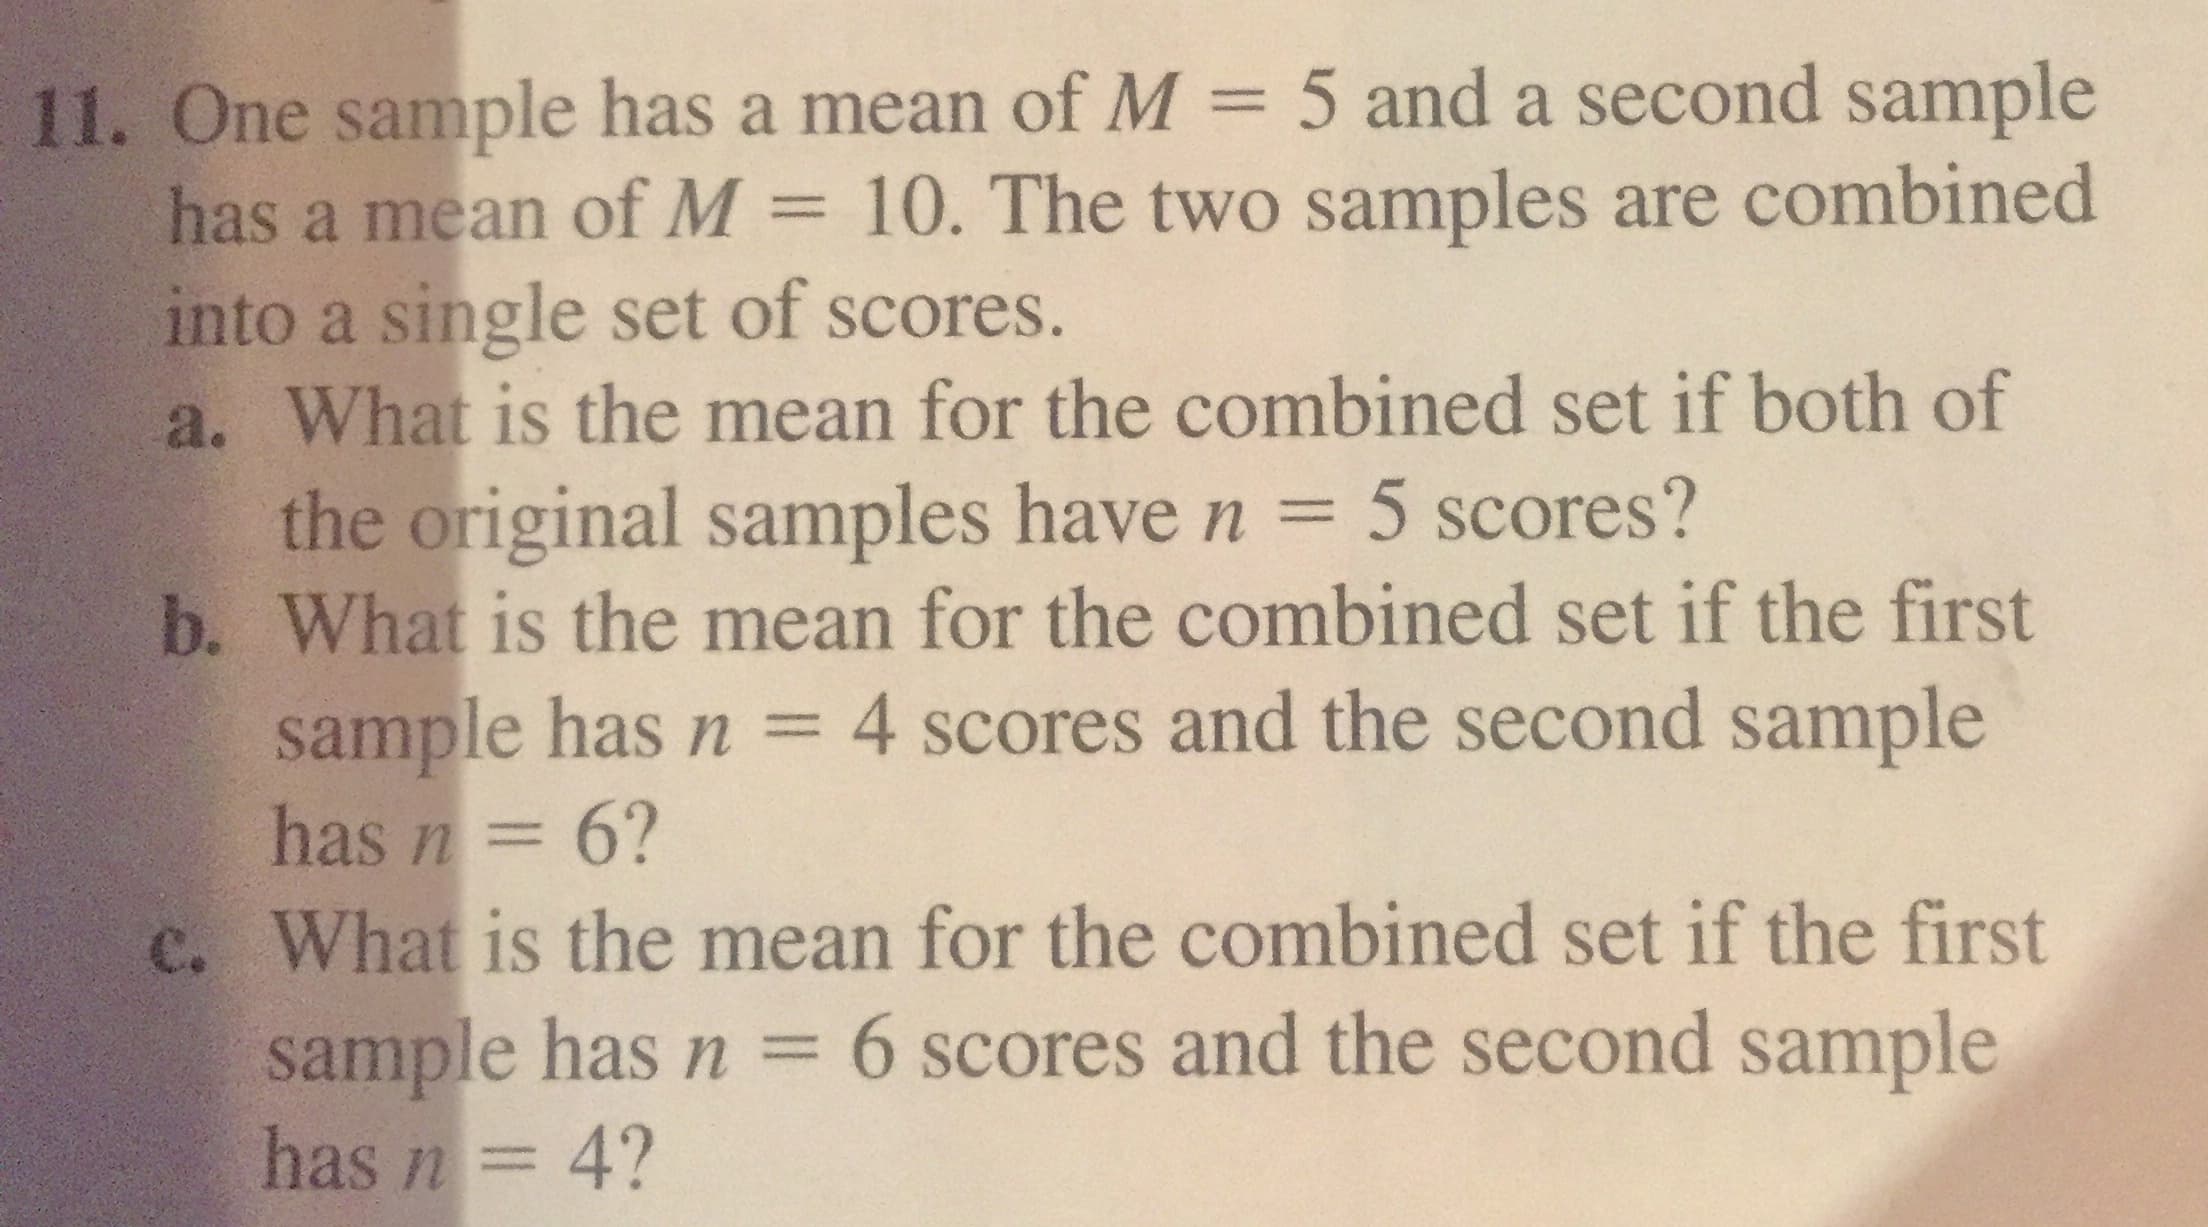 11. One sample has a mean of M = 5 and a second sample
has a mean of M = 10. The two samples are combined
into a single set of scores.
a. What is the mean for the combined set if both of
the original samples have n = 5 scores?
b. What is the mean for the combined set if the first
sample has n = 4 scores and the second sample
has n= 6?
c. What is the mean for the combined set if the first
sample has n = 6 scores and the second sample
has n= 4?
%3D
